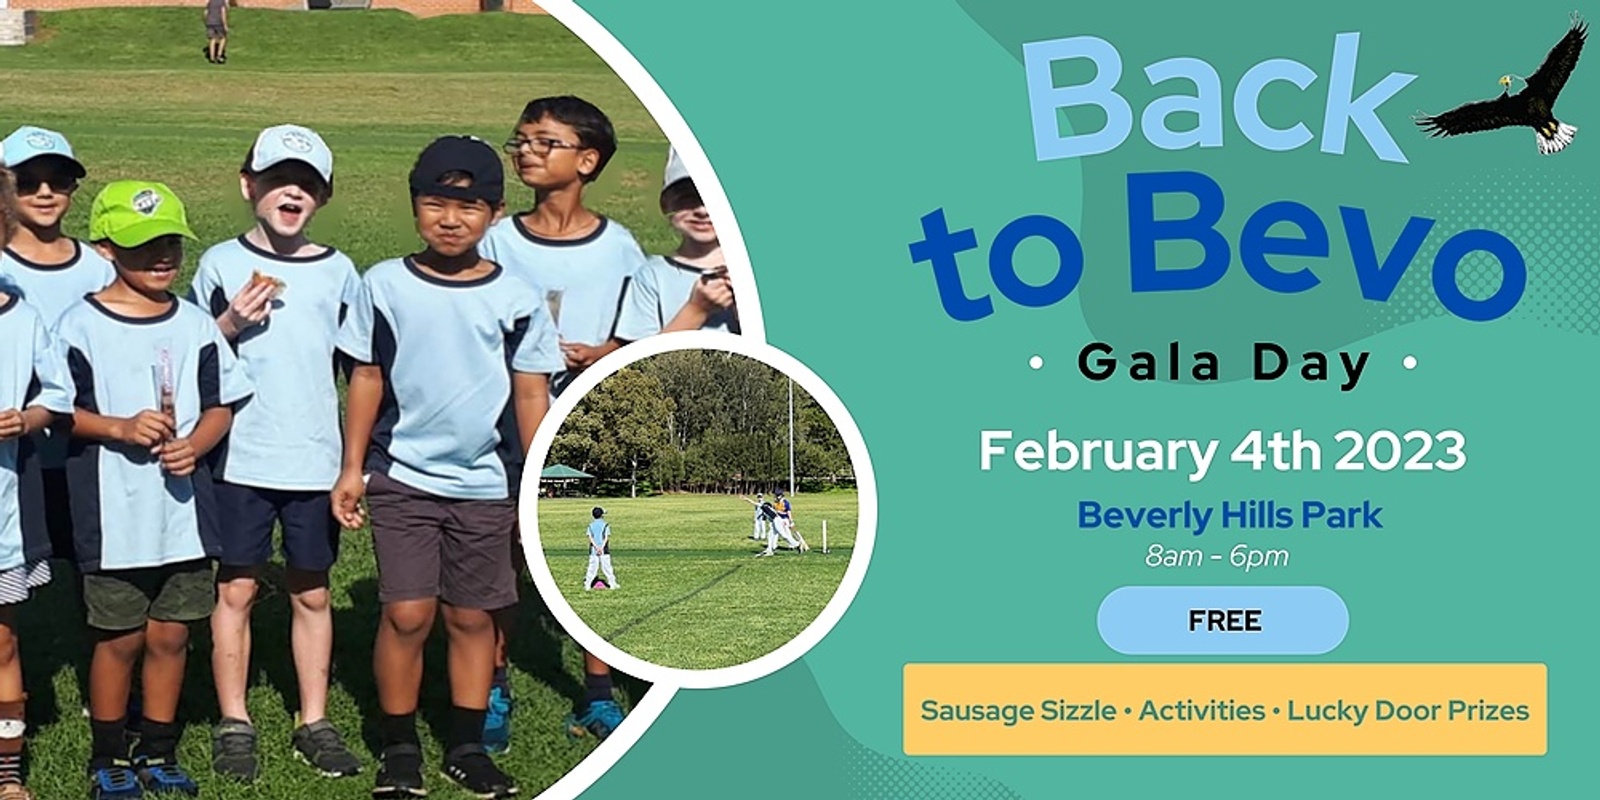 Banner image for Back to Beverly Hills Park Gala Day